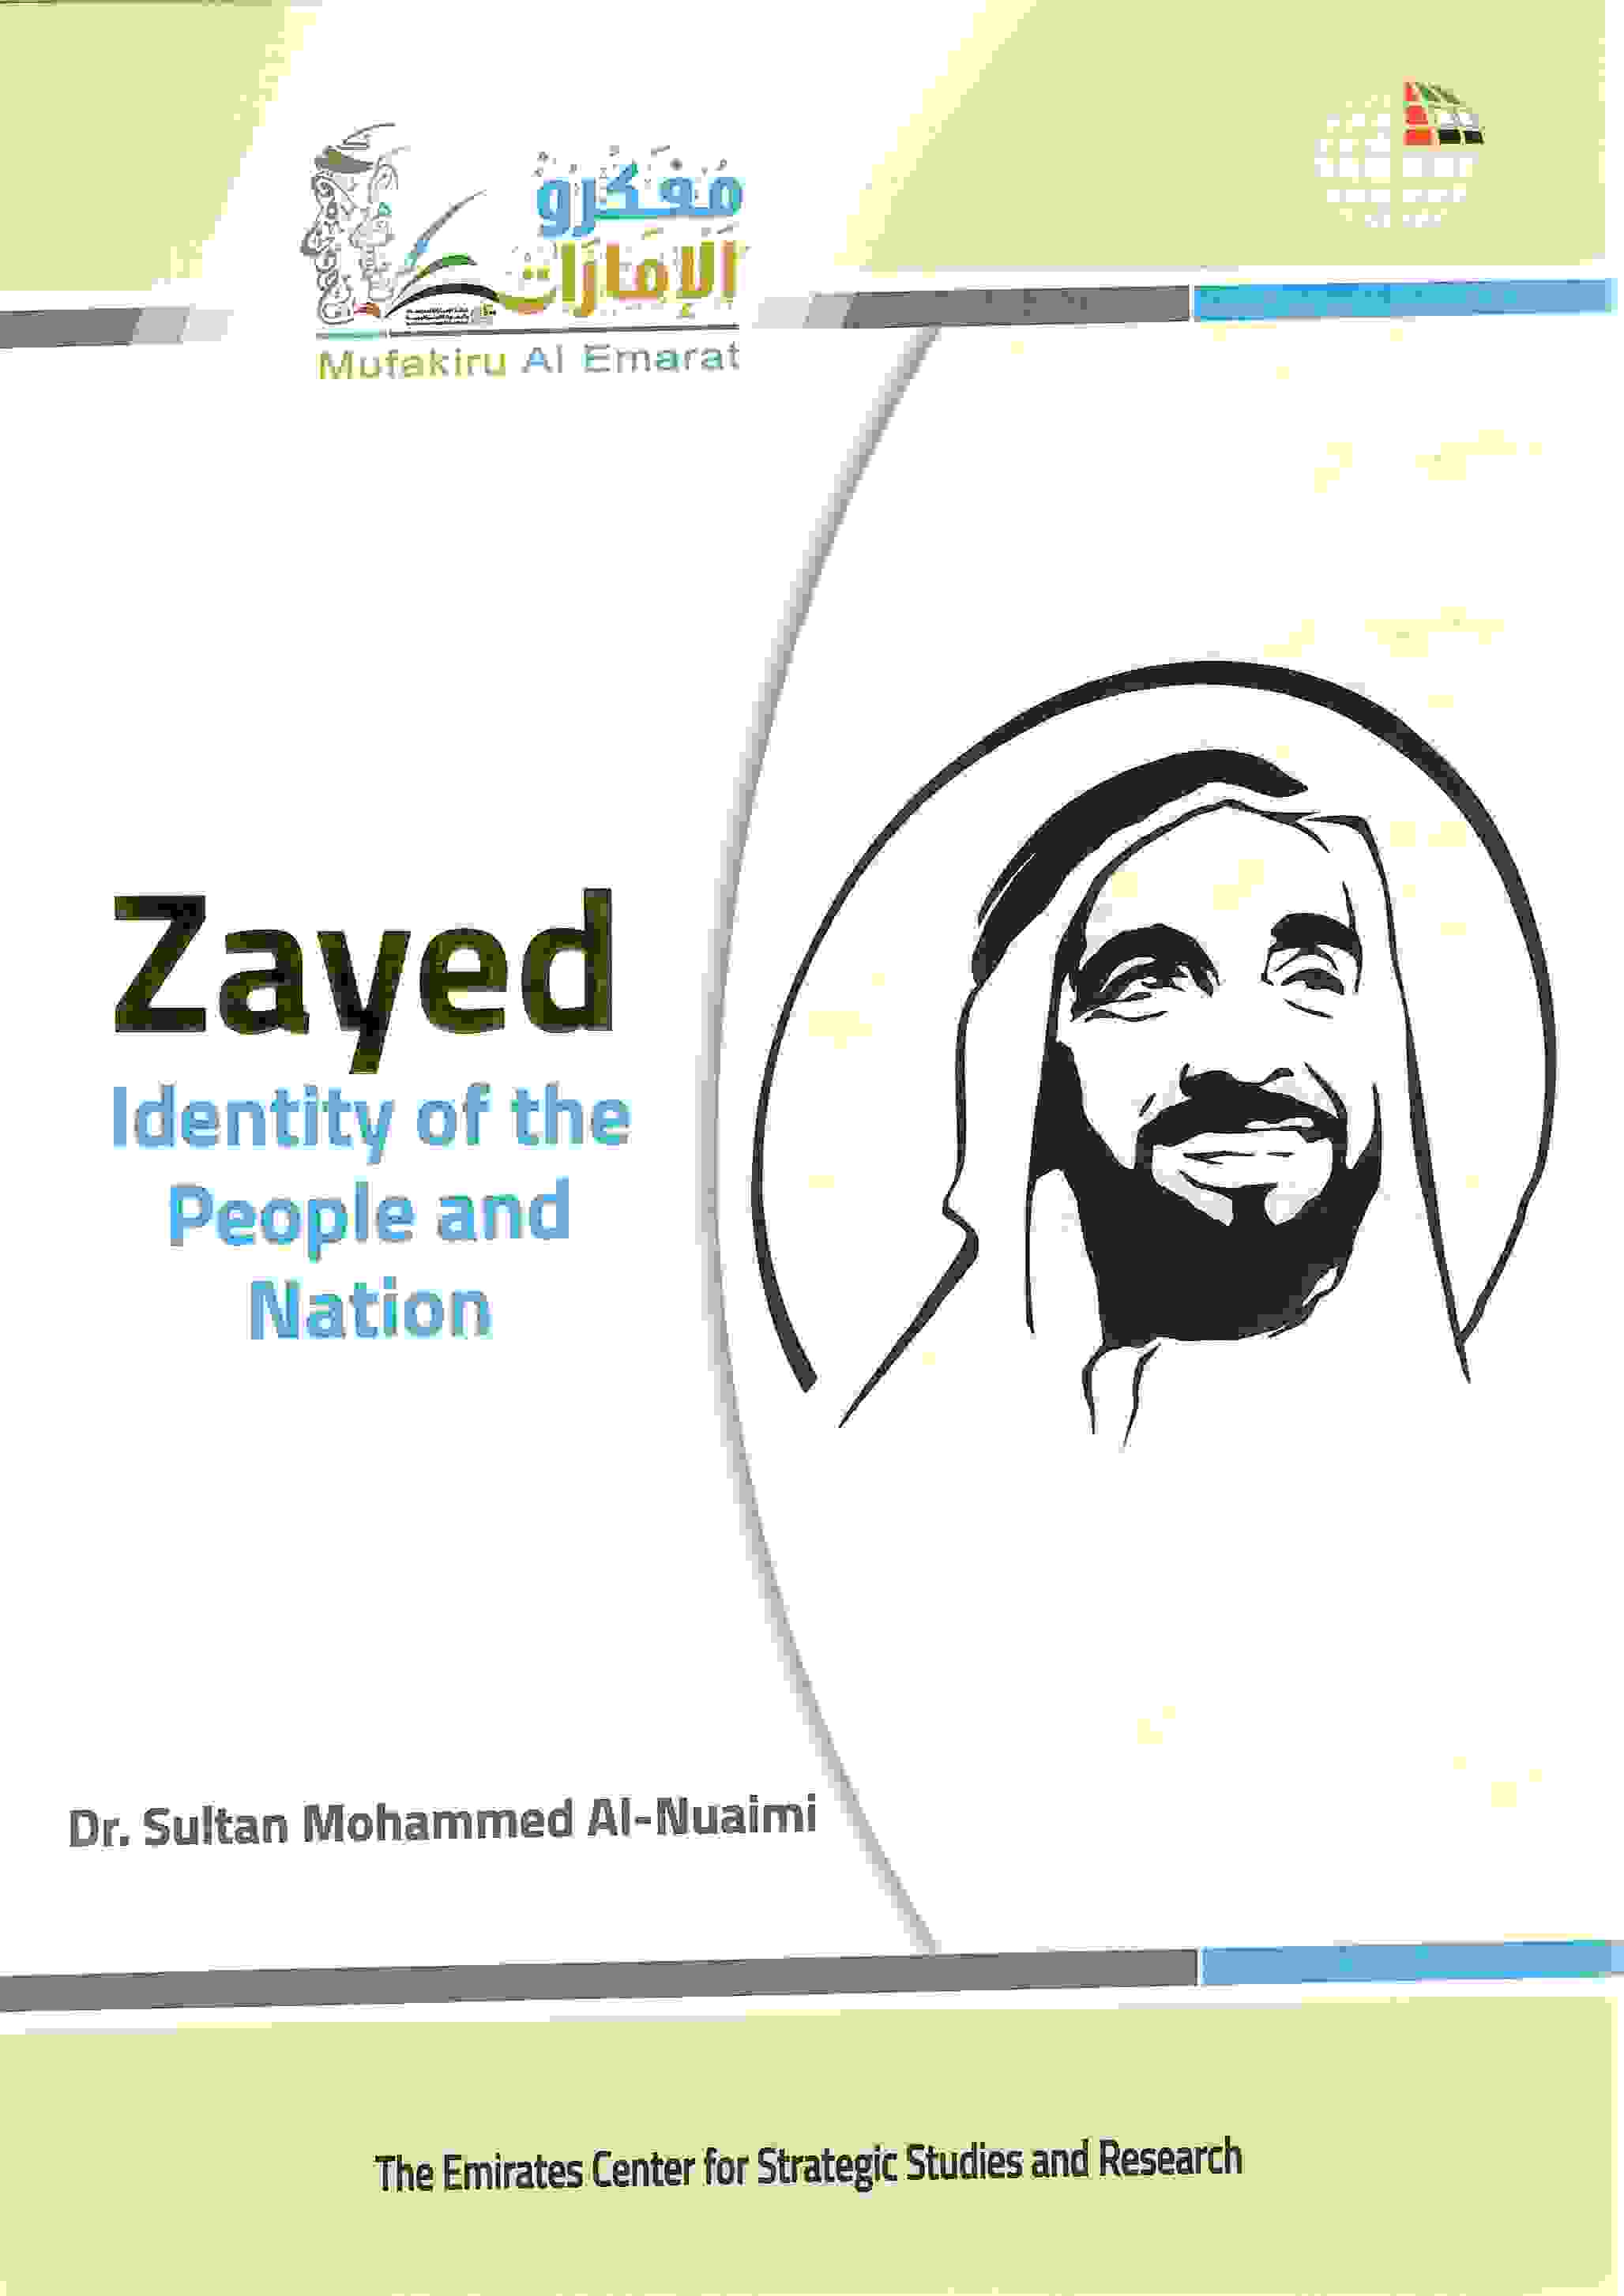 ZAYED IDENTITY OF THE PEOPLE AND NATION